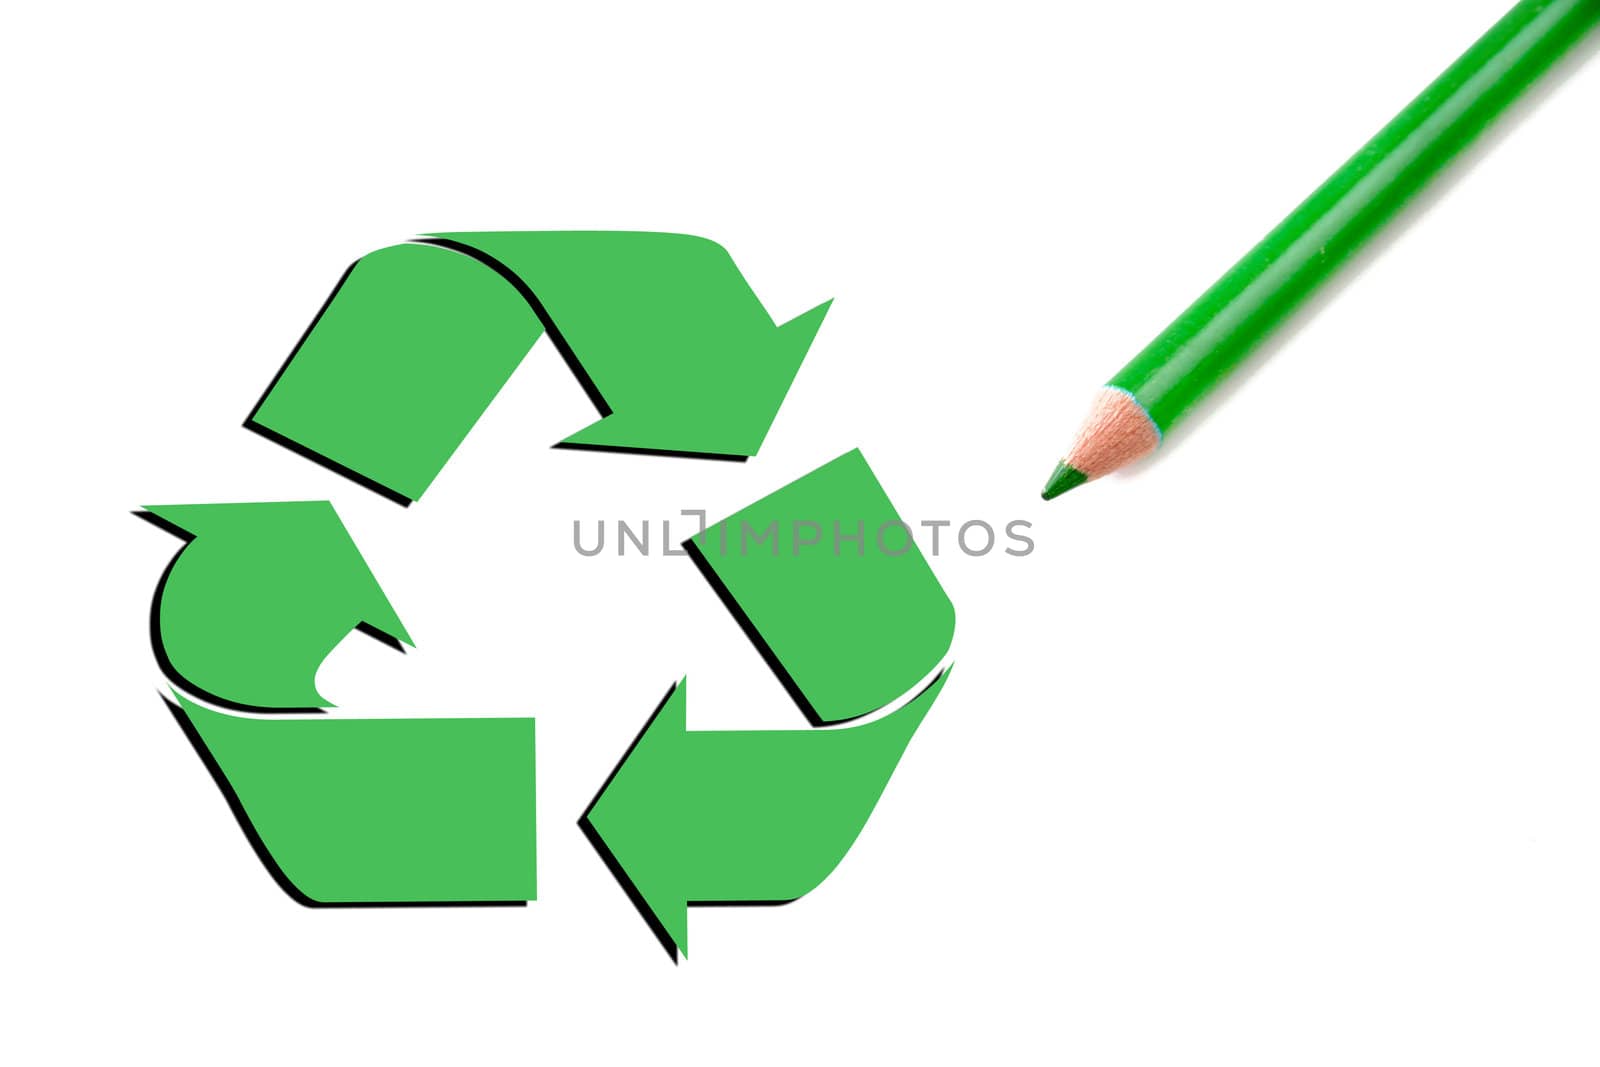 Recycle symbol along with a green pencil with shadow.  Concept of a cleaner Earth.  Room also avaiable for copy space.